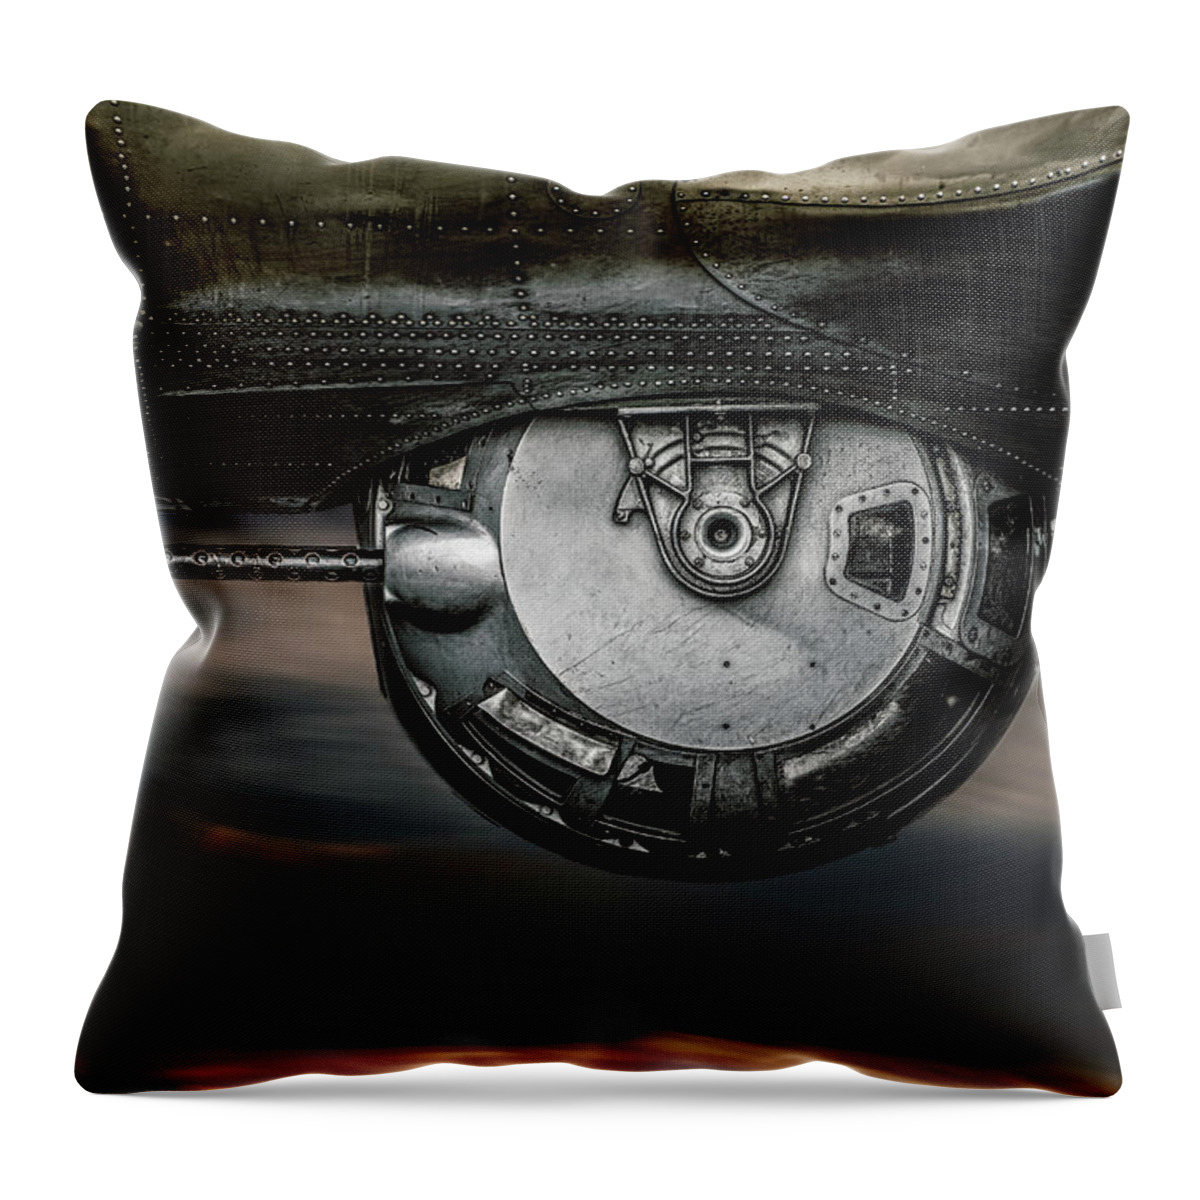 Ball Turret Throw Pillow featuring the photograph B-17 Gun Turret No 2 by Bob Orsillo